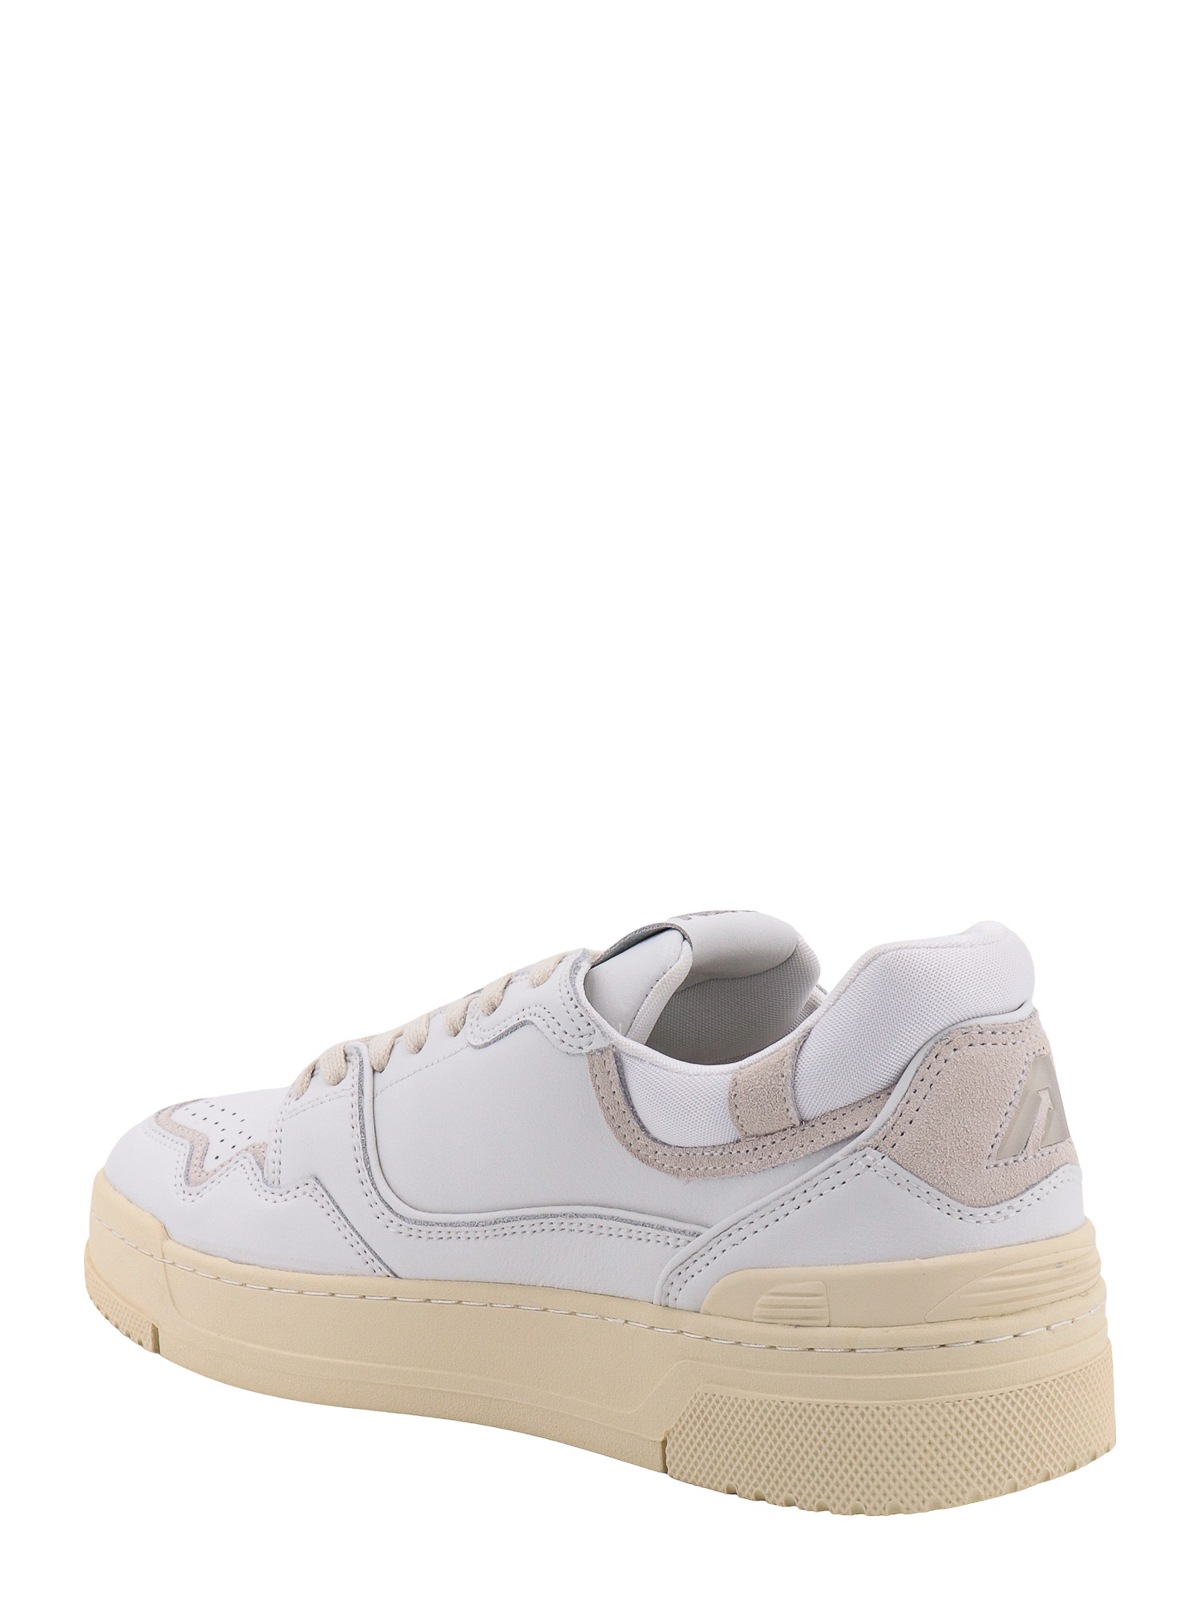 Shop Autry Rookie Low In White